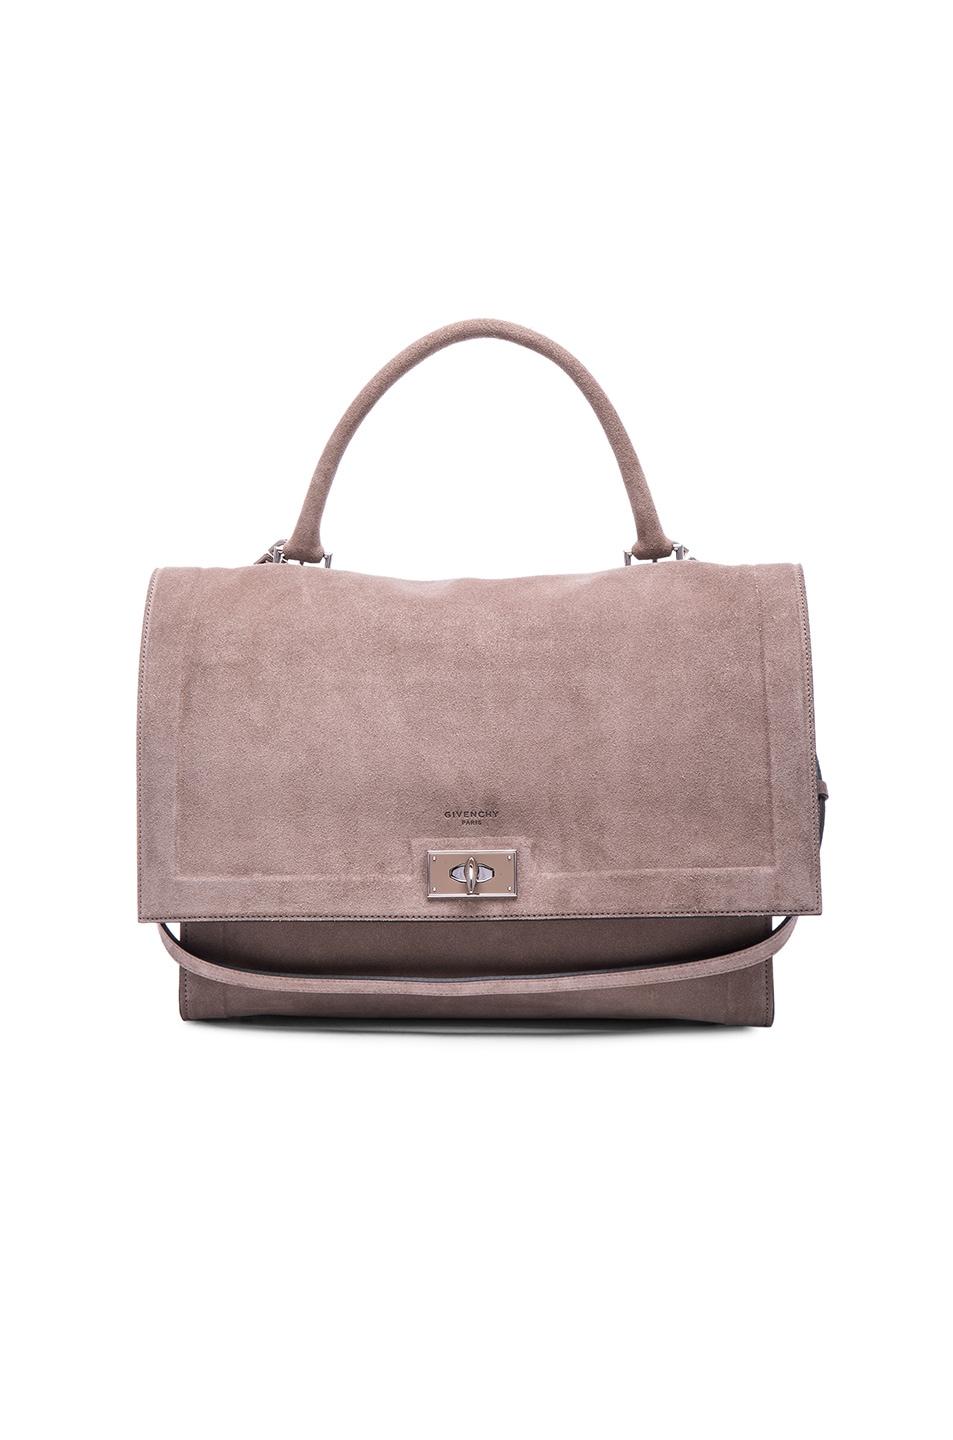 Image 1 of Givenchy Medium Suede Shark Bag in Sand